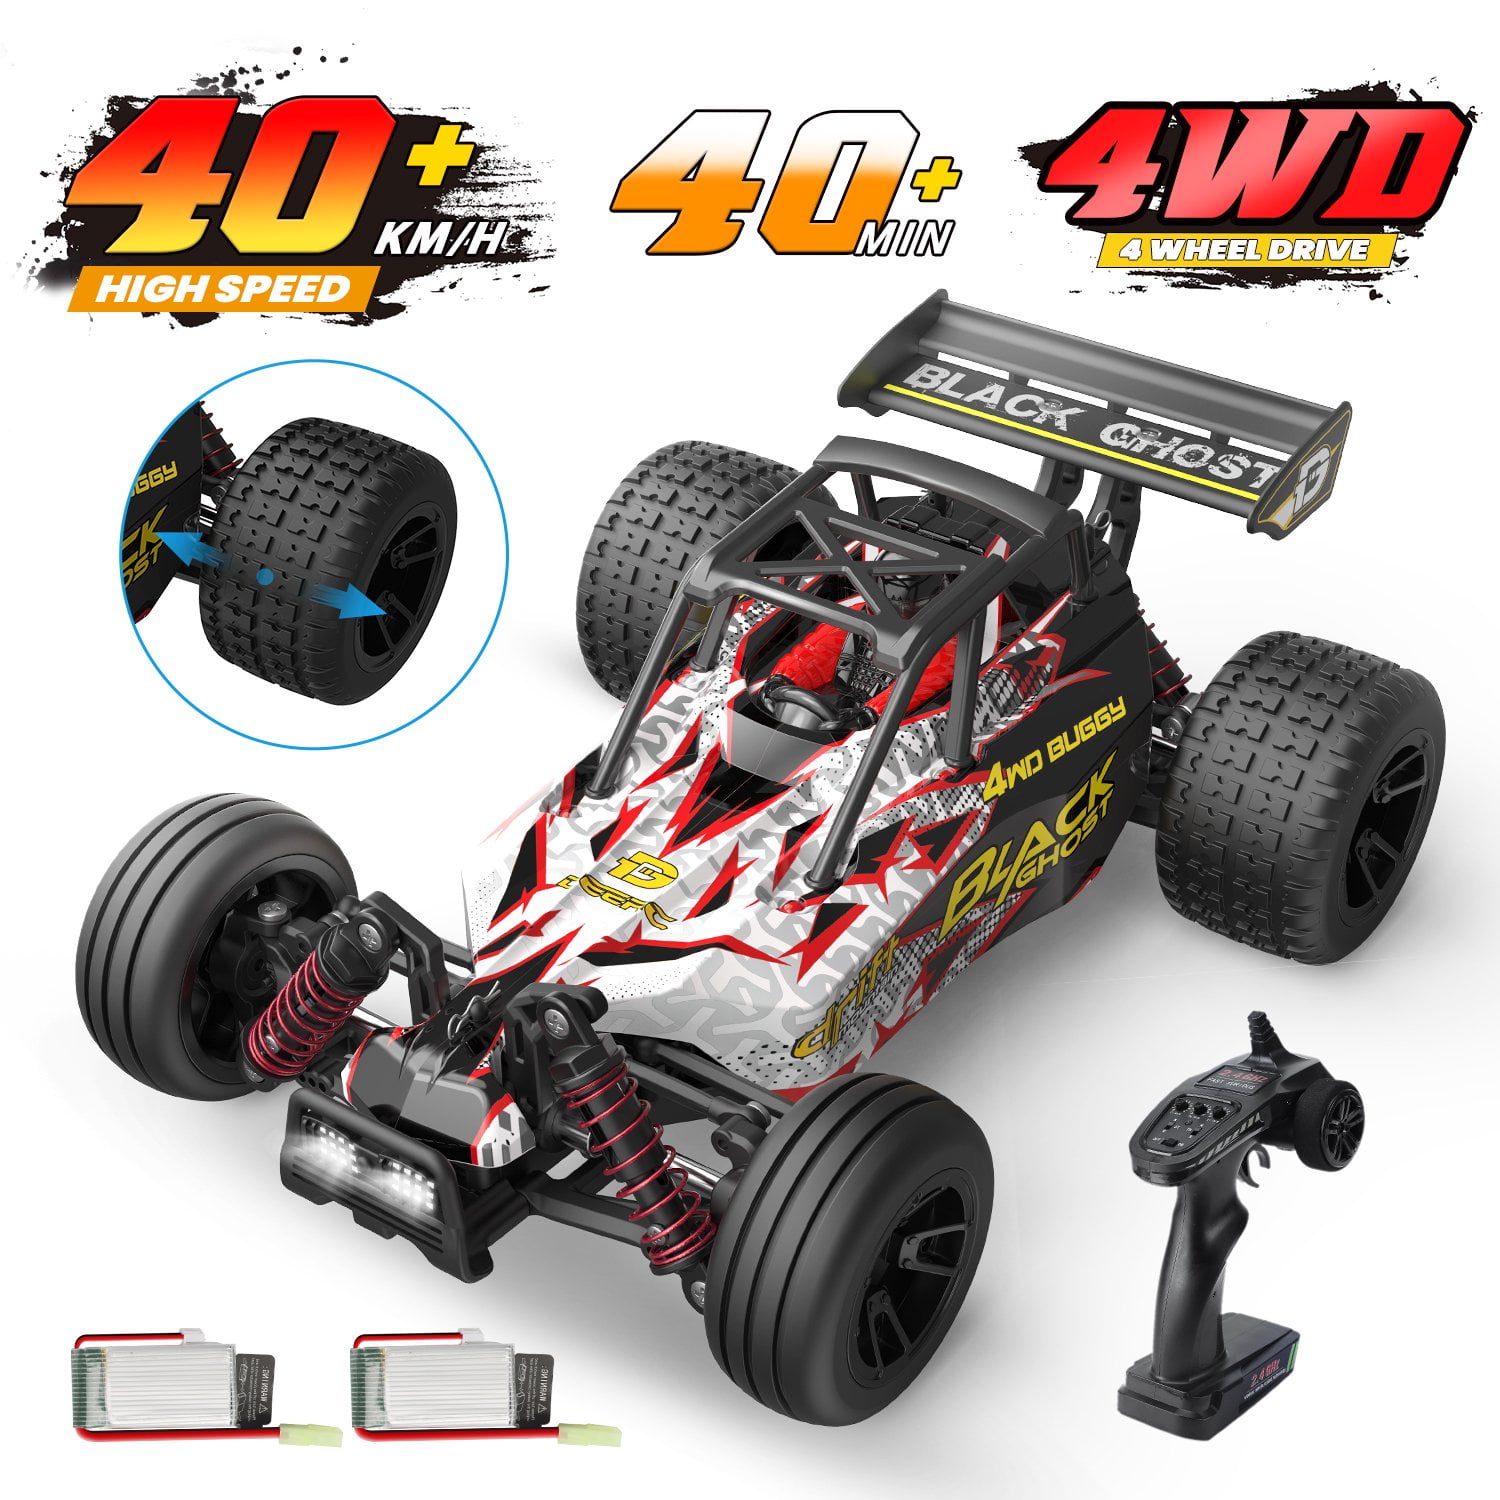 Electric 40+MPH RC 1:18 Car 2.4G 4WD High Speed Fast Remote Controlled Large 